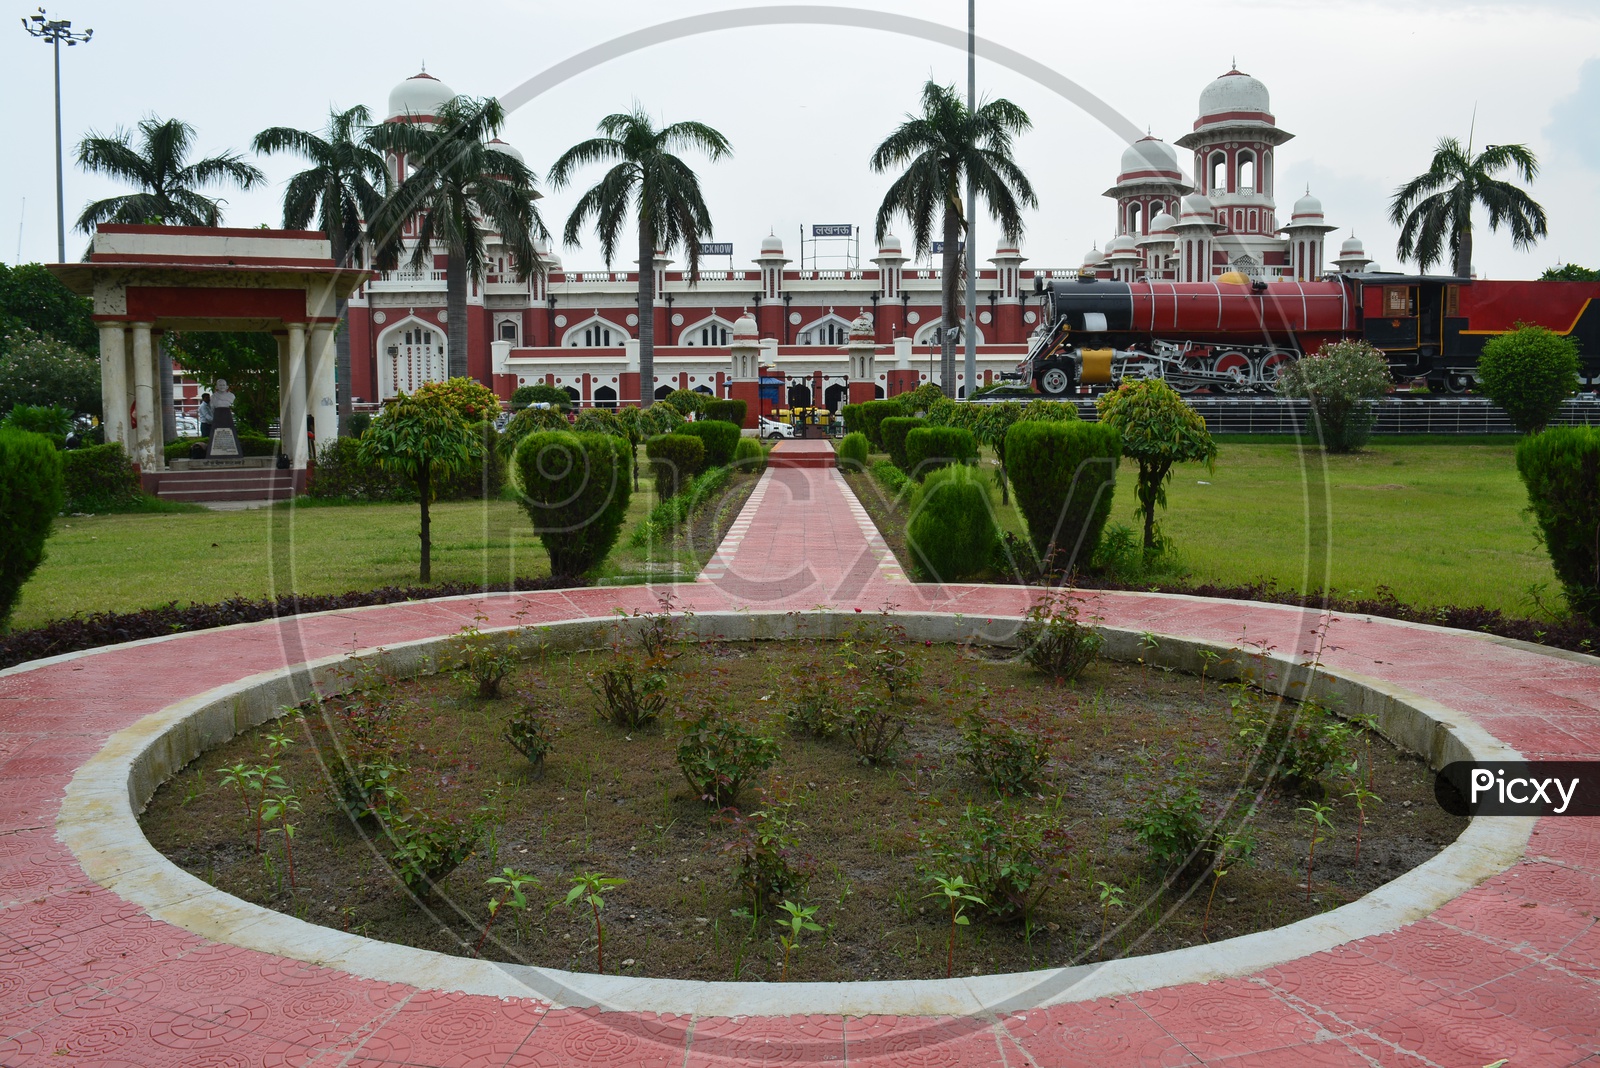 Charbagh Railway Station, Lucknow